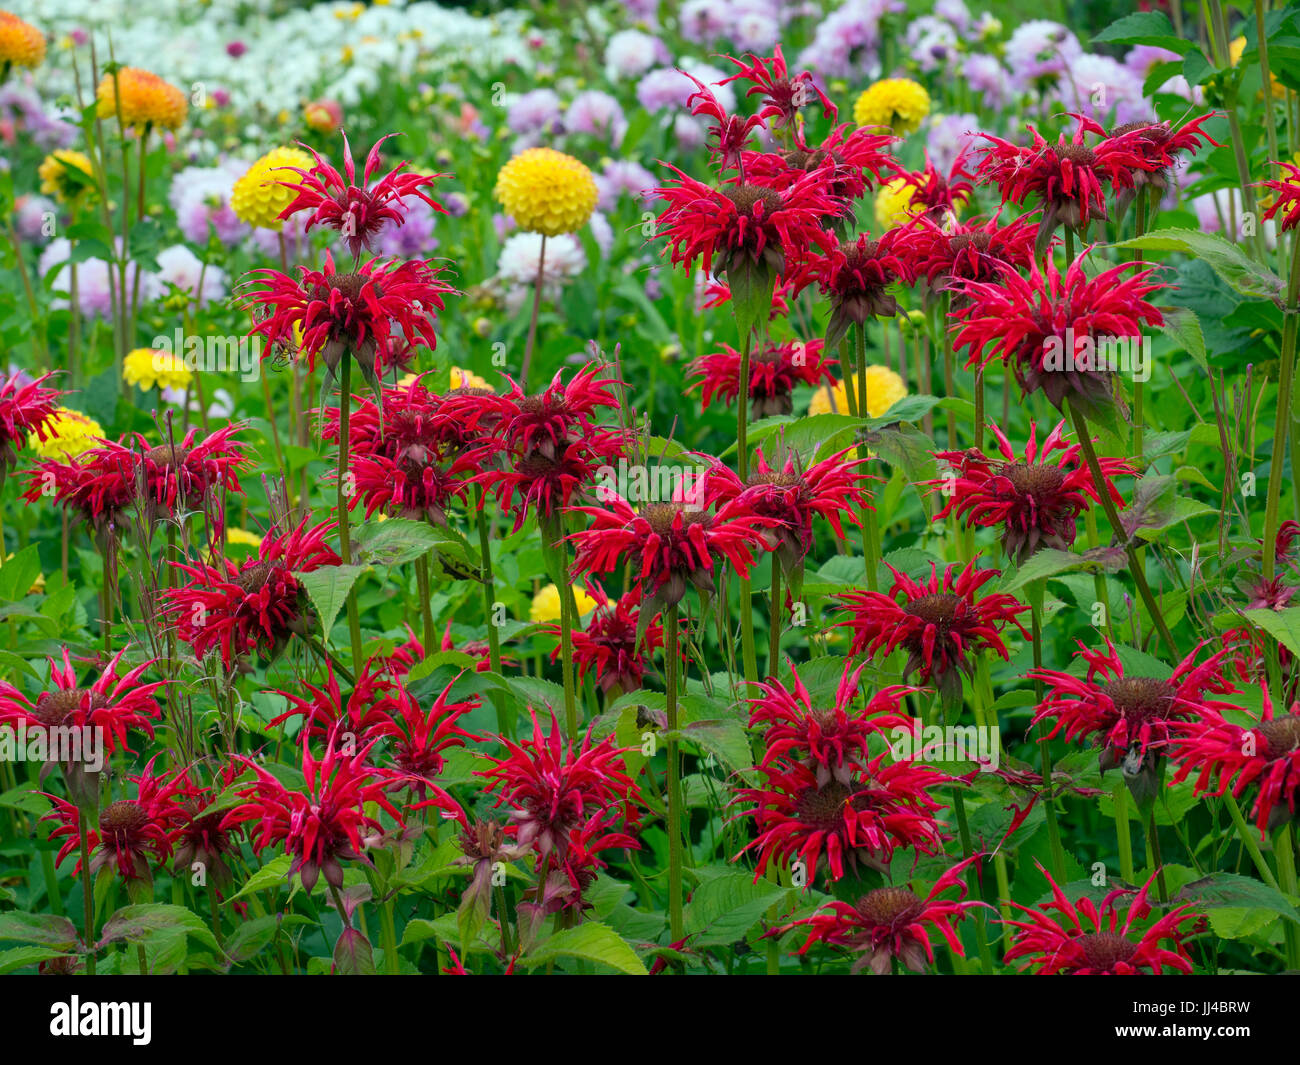 Maltese Cross Flowers Lychnis chalcedonica in Herbaceous bed July Stock Photo